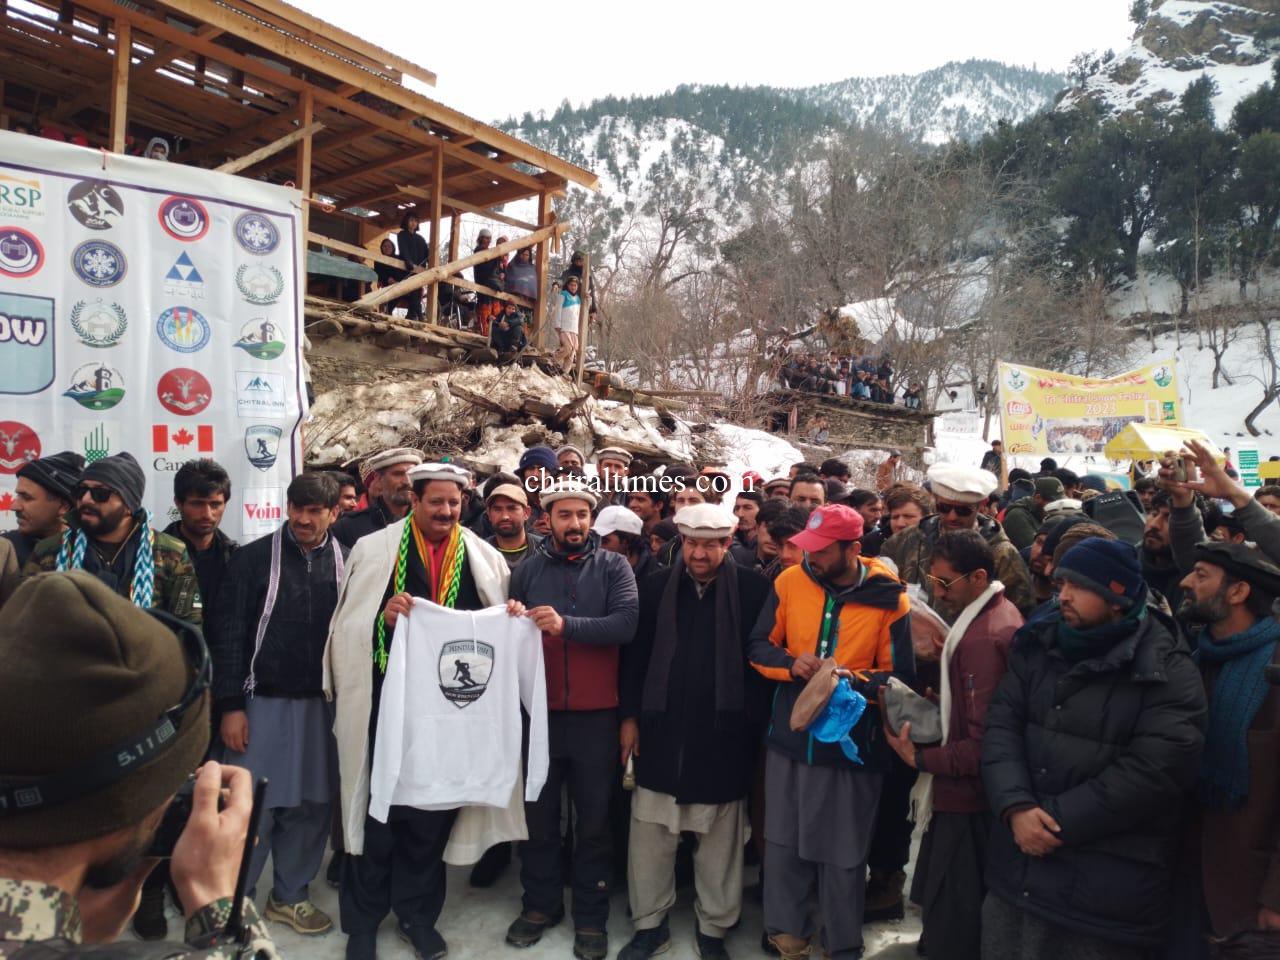 chitraltimes kalash snow sports festival concludes here in bumburait chitral 2